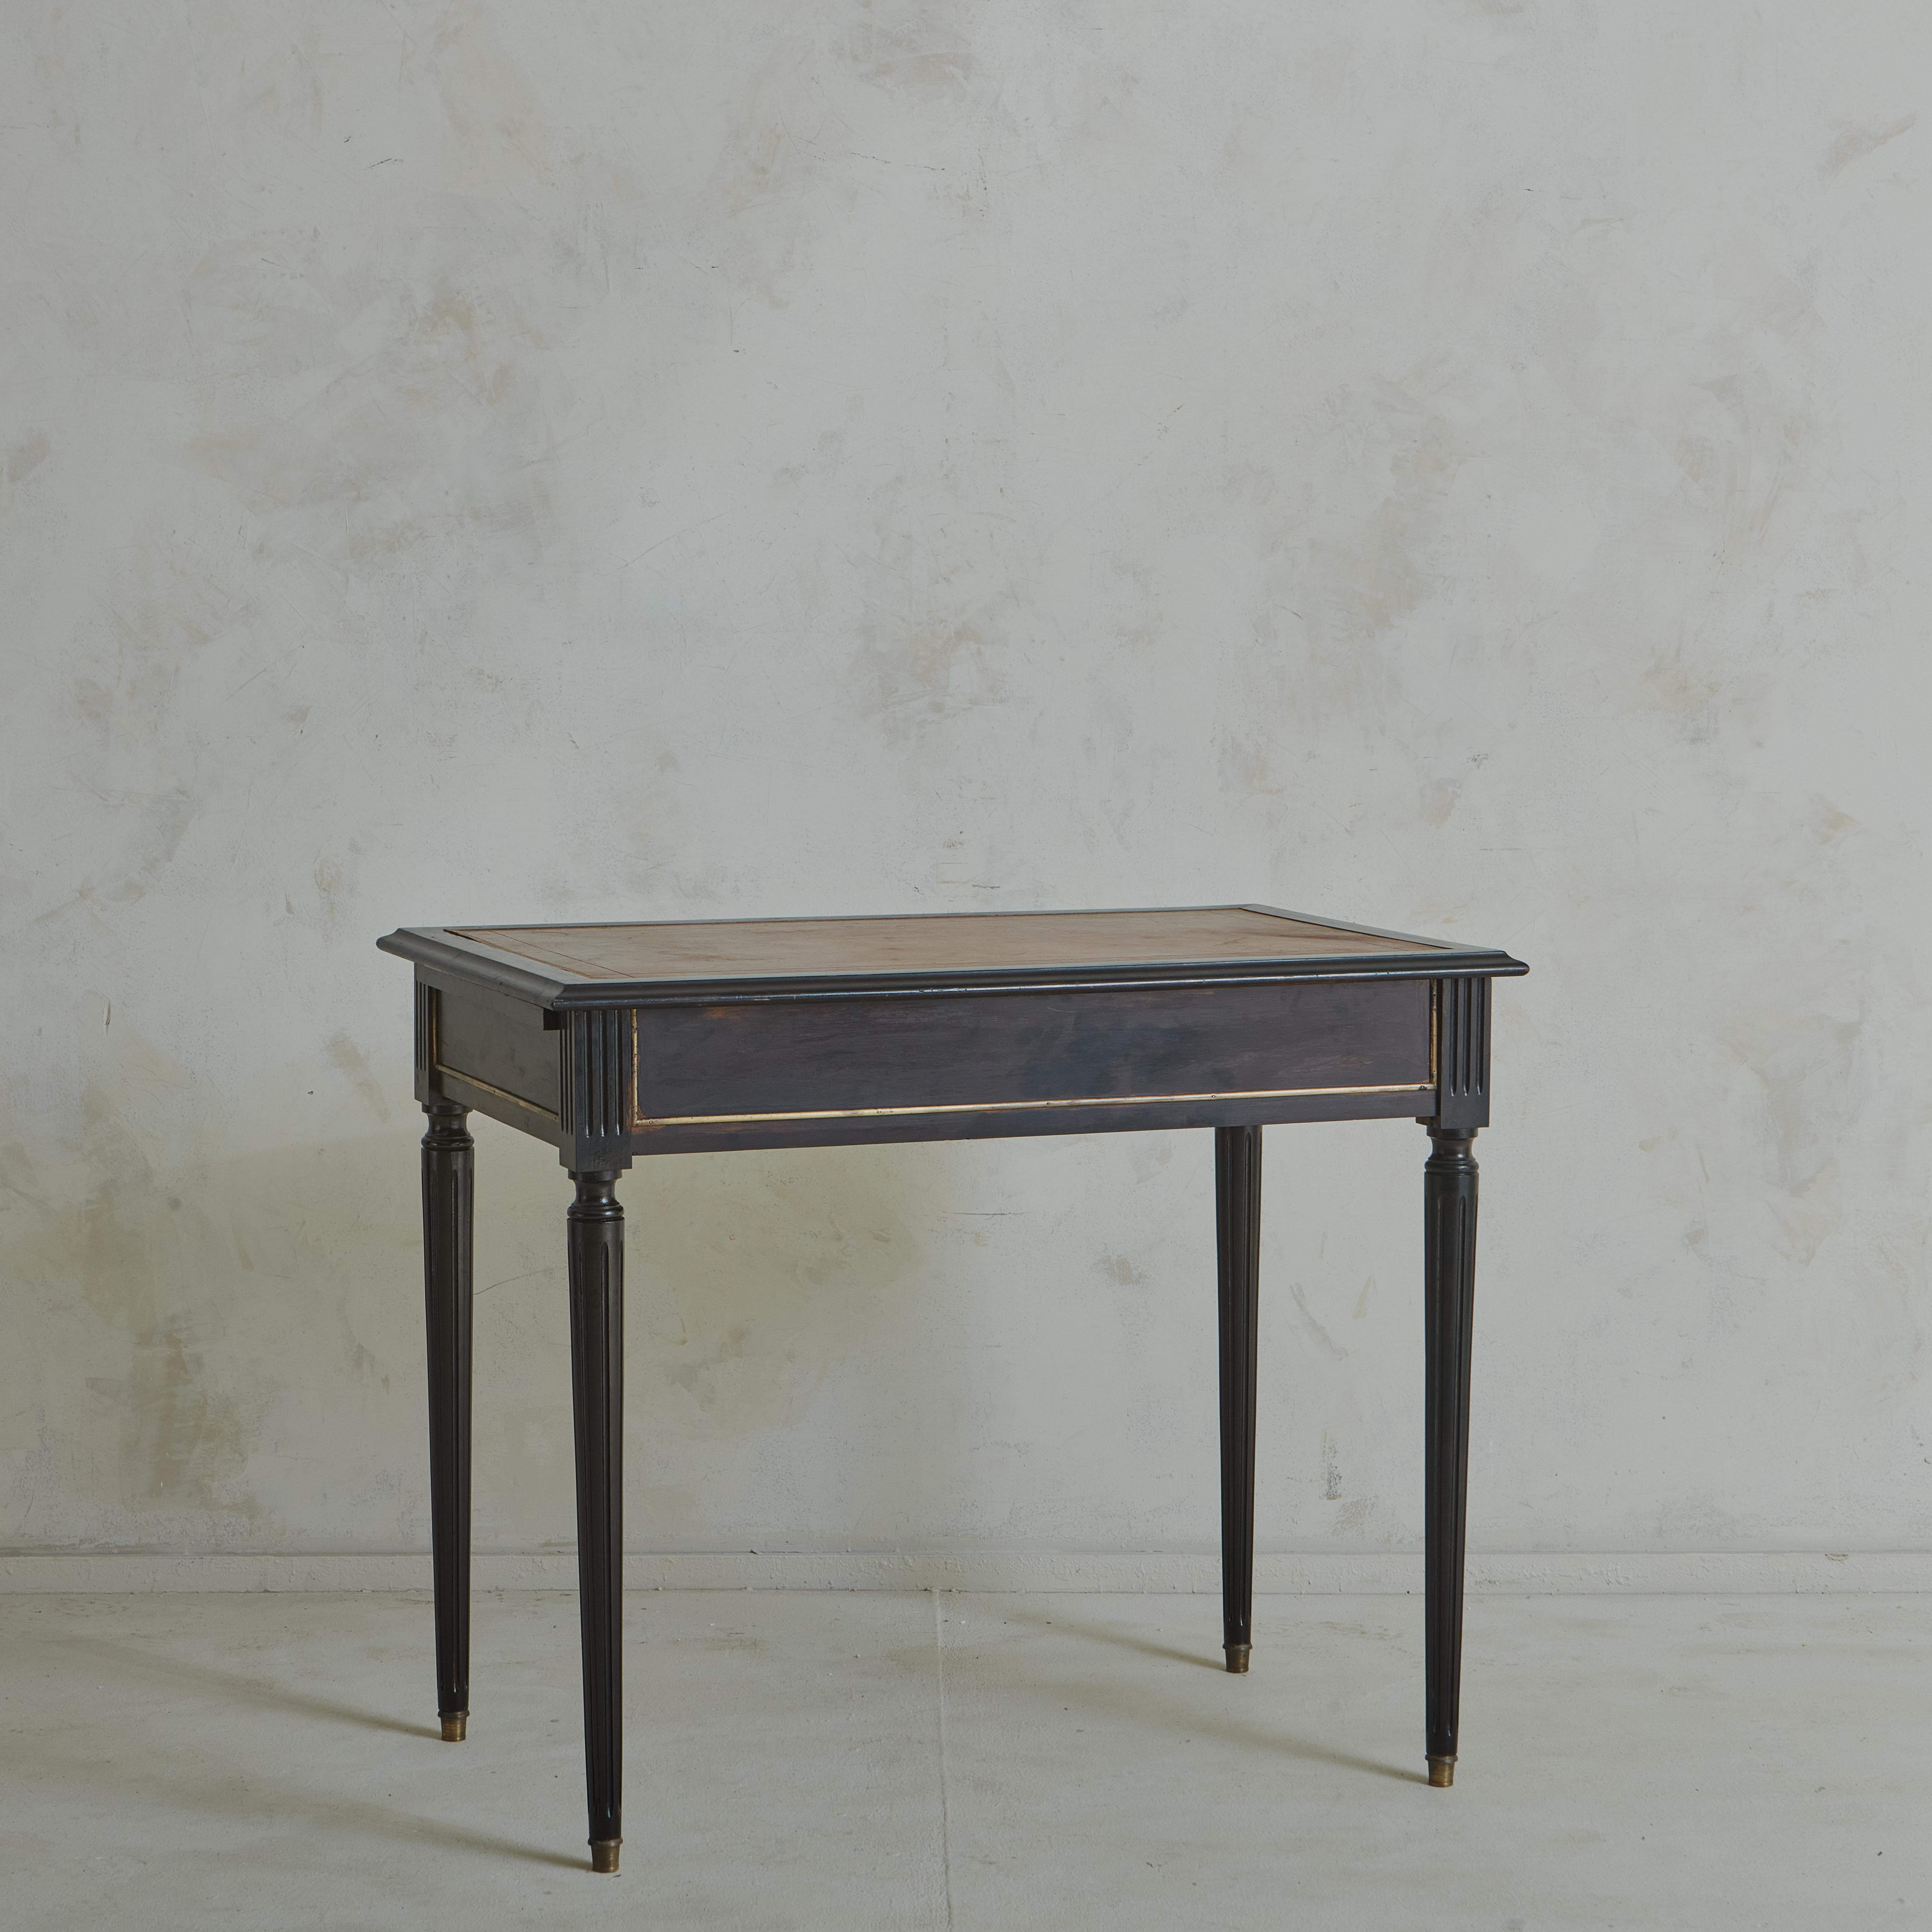 An elegant French Louis XVI style writing desk featuring an inset, embossed chestnut brown leather top with a hand applied gold leaf trim. This desk has two extendable leaves, which pull-out from the sides of the desk, providing additional surface